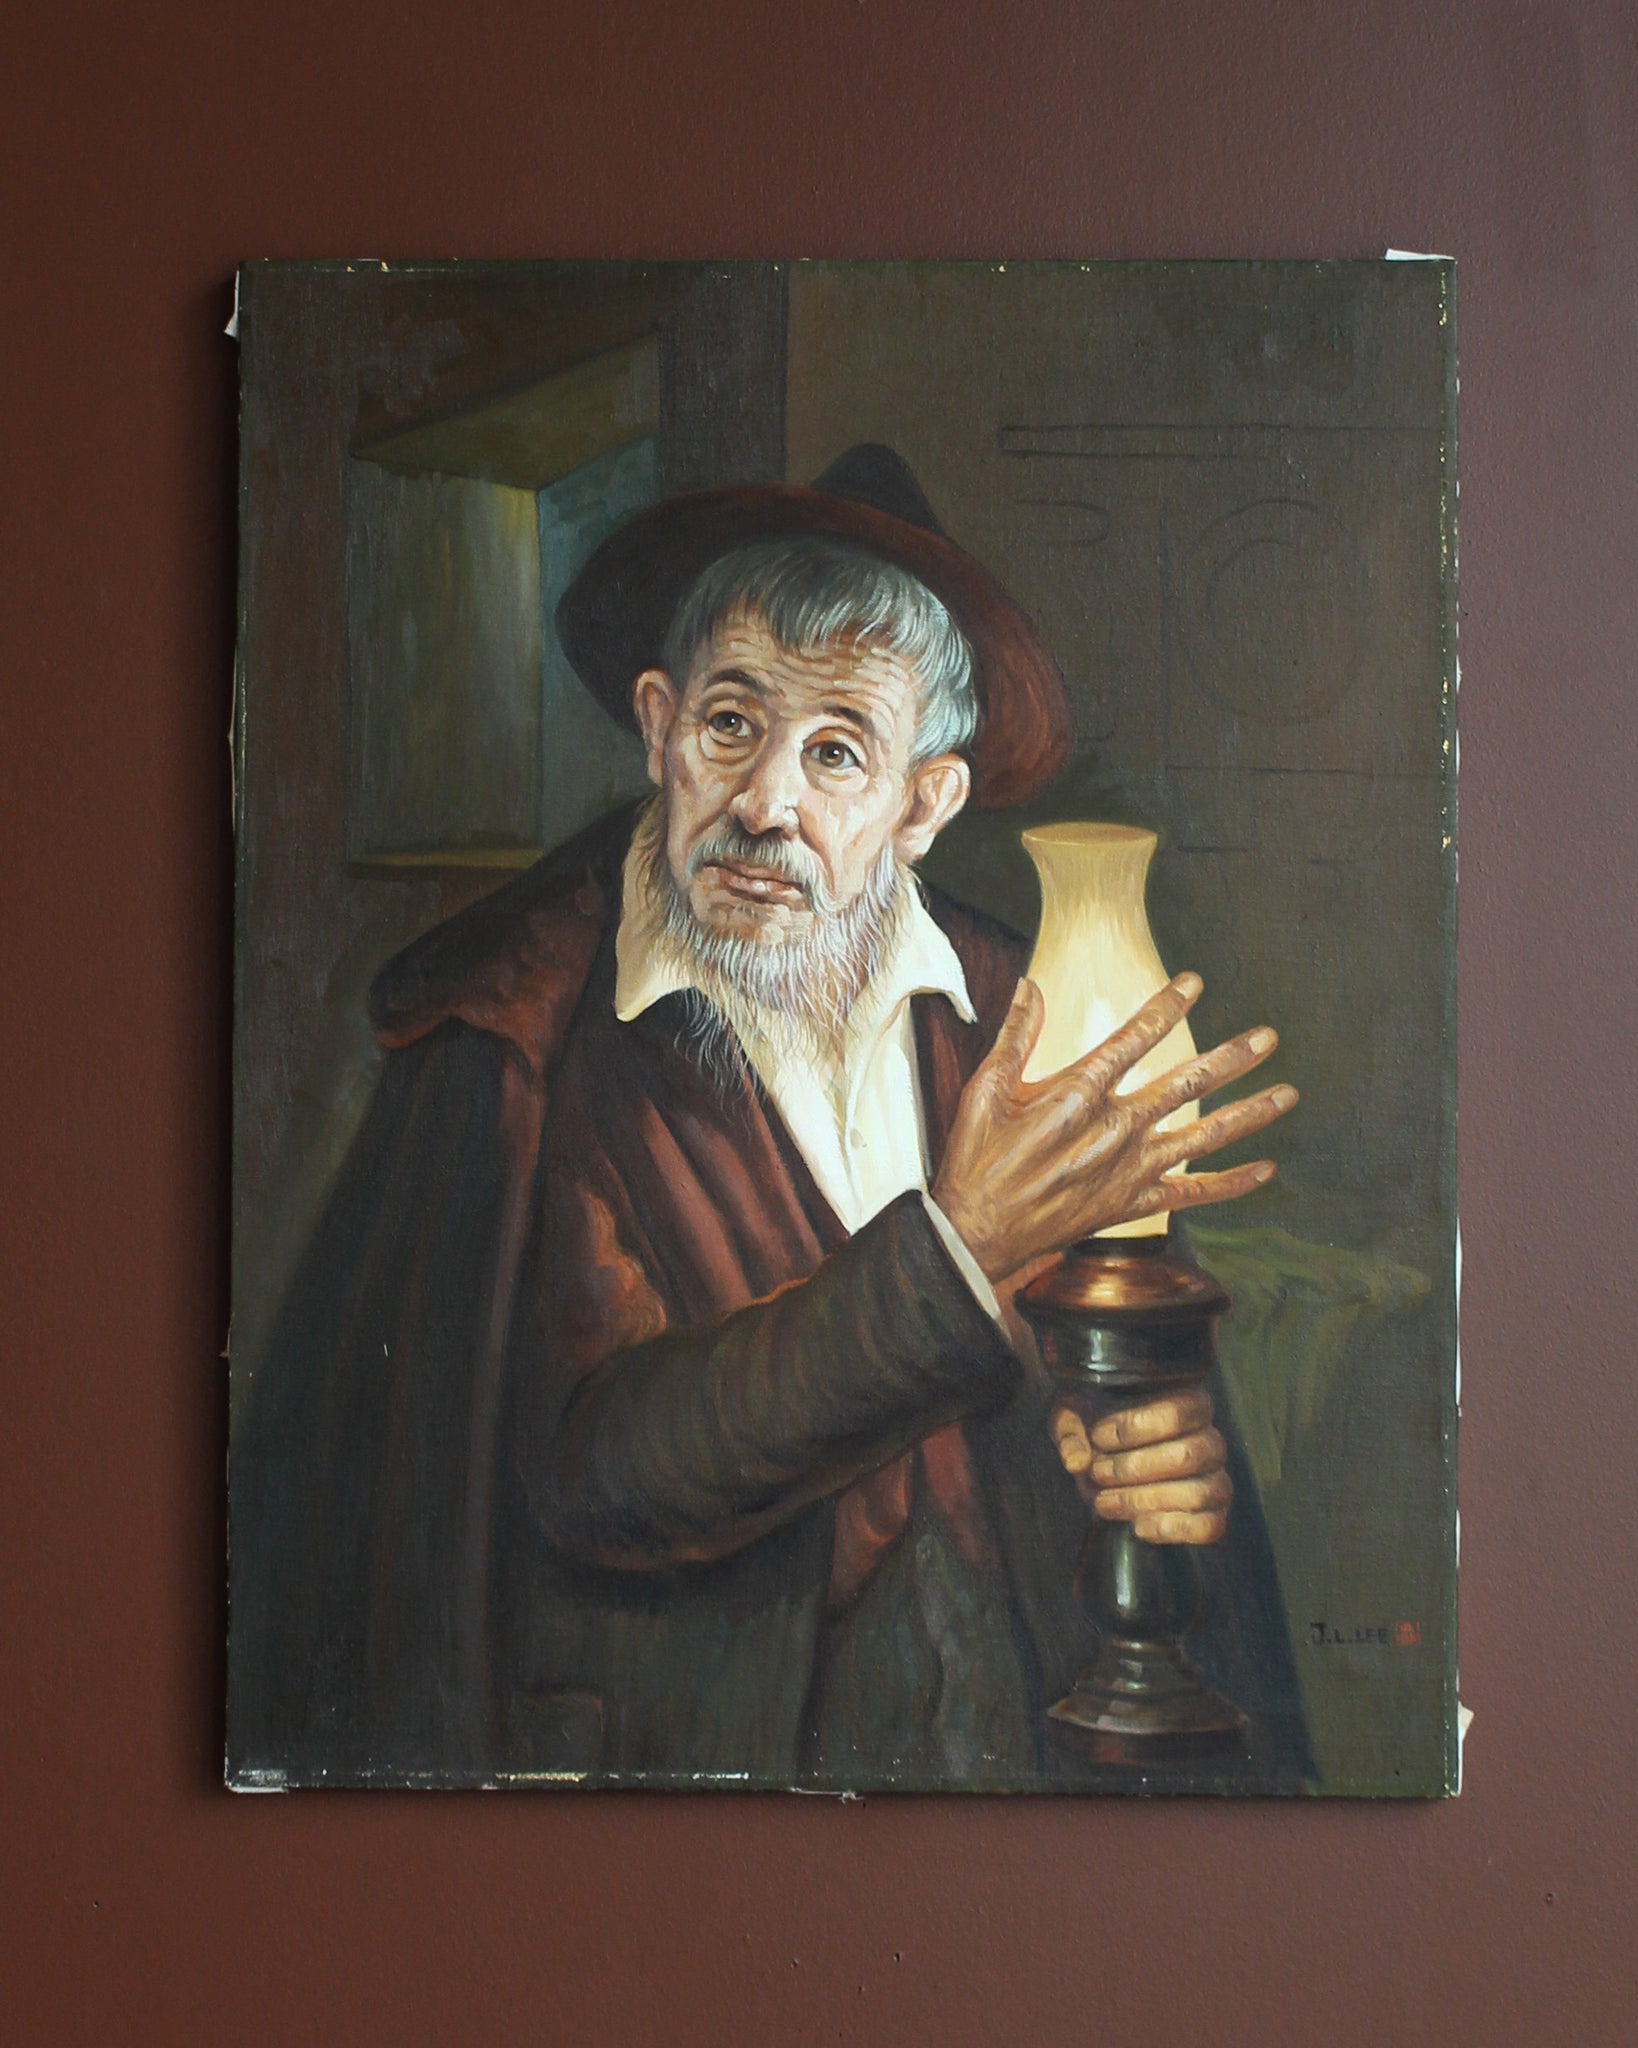 Man with Oil Lamp, Oil on Canvas